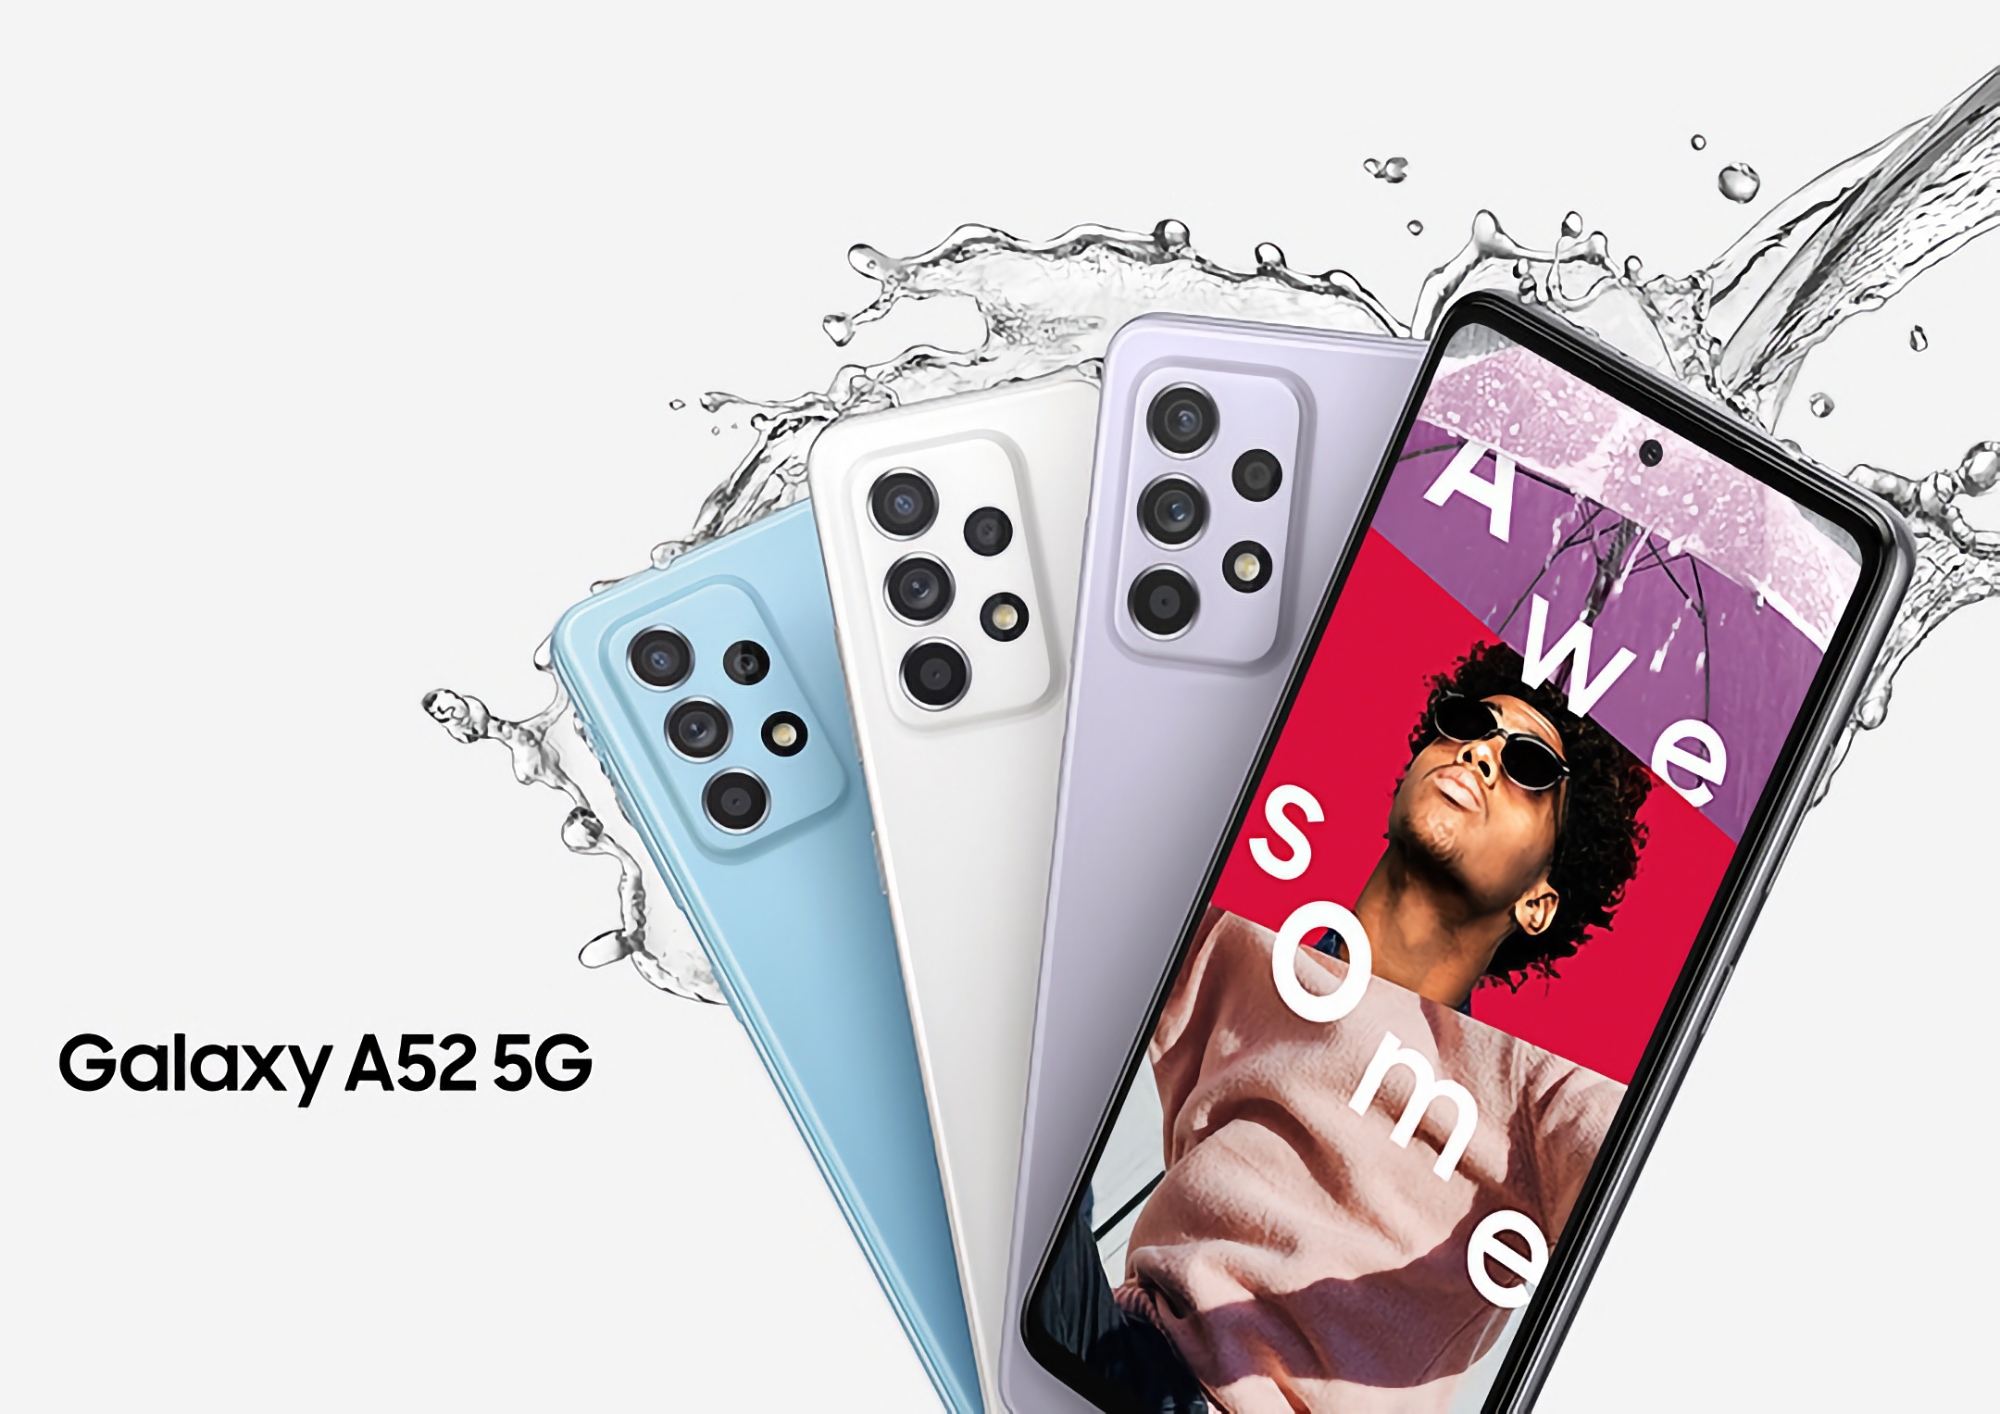 Finally, Samsung Galaxy A52 5G users in the US have started receiving Android 13 with One UI 5.0